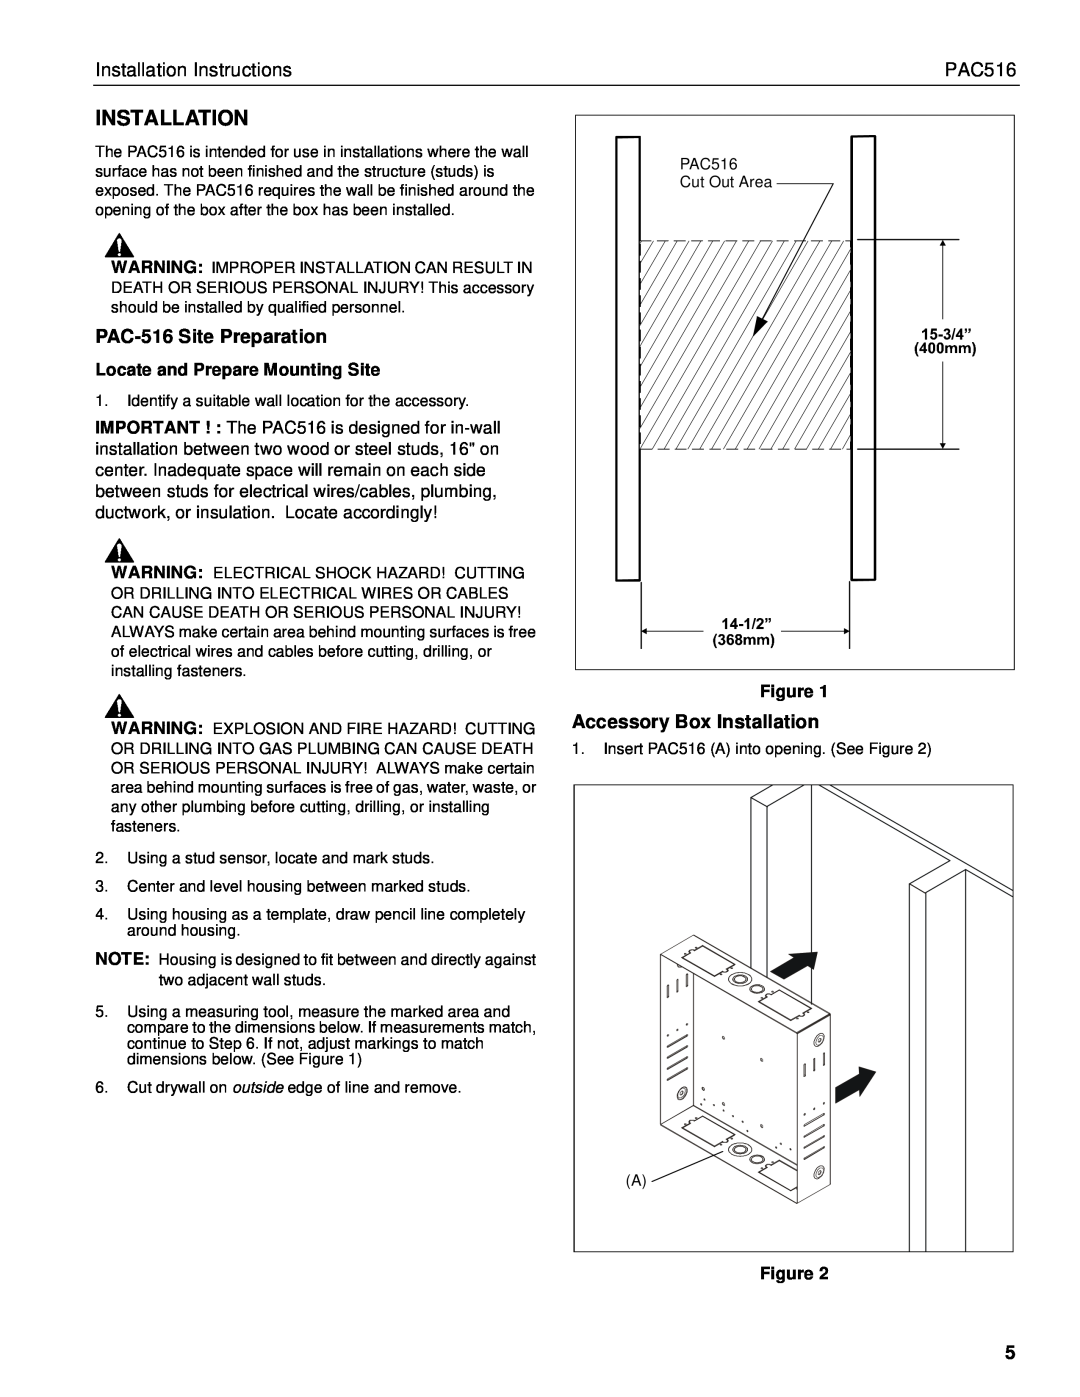 Chief Manufacturing IMPORTANT ! The PAC516 is designed for in-wall, Installation Instructions 